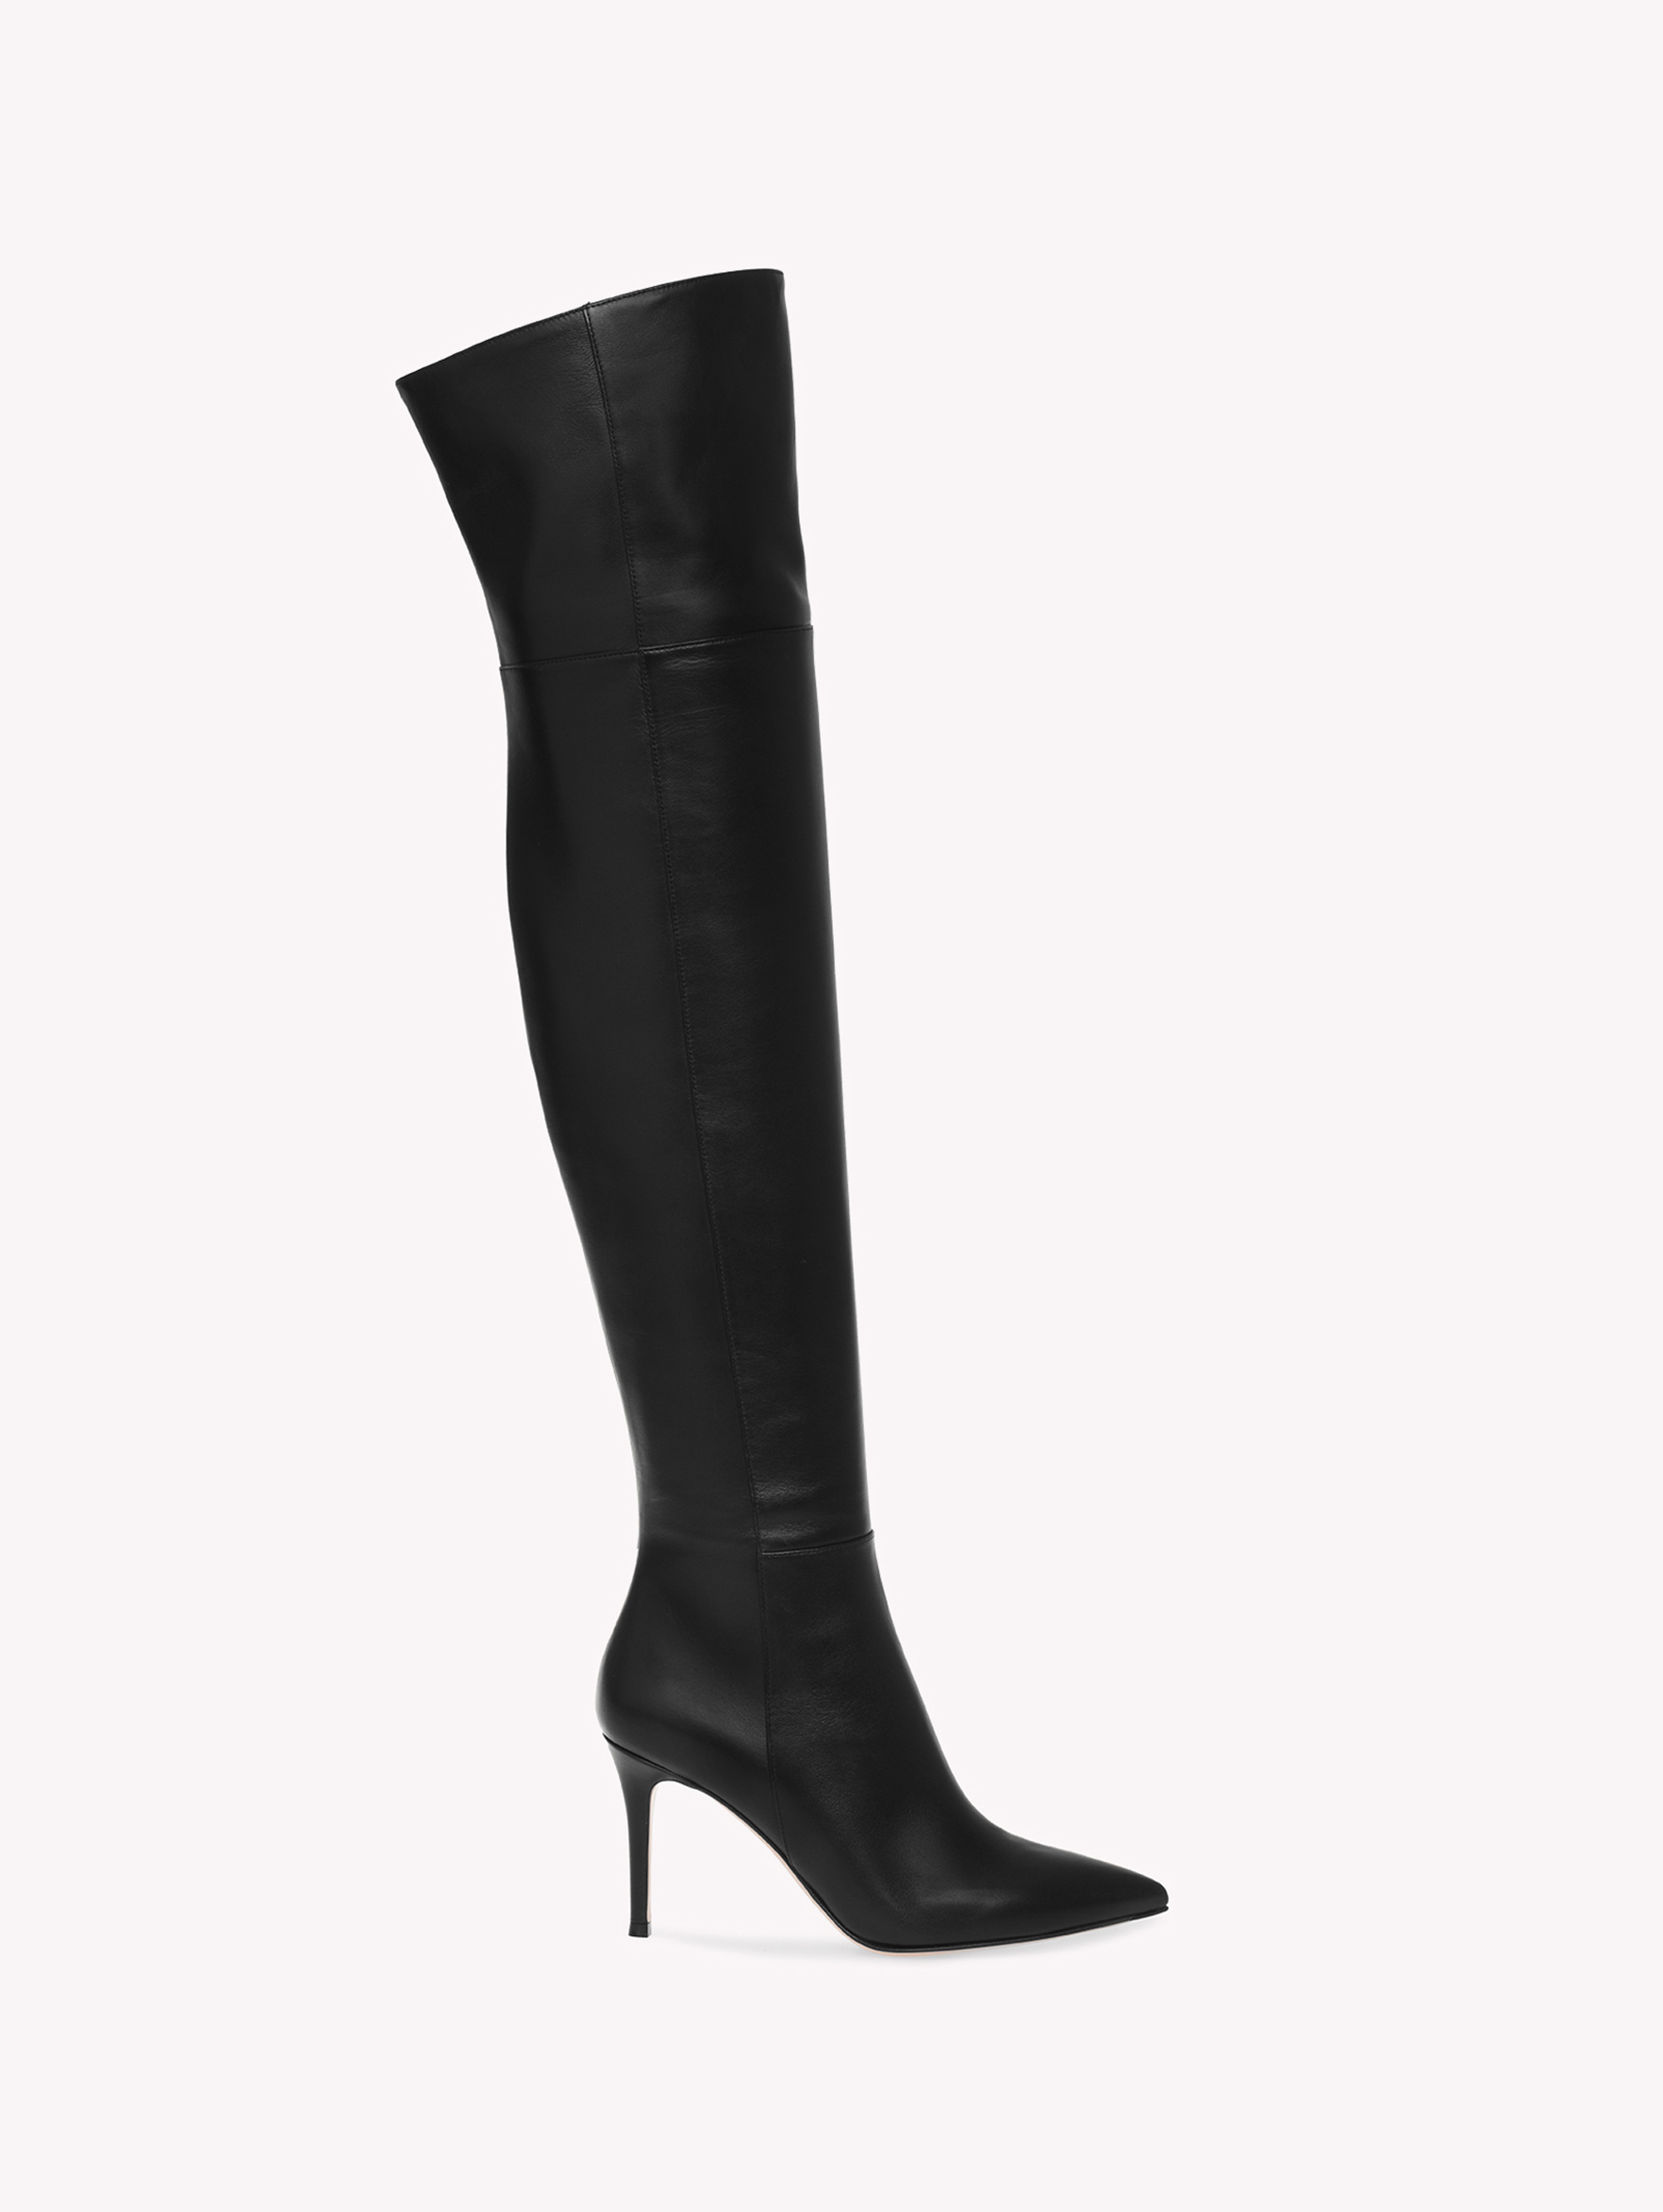 Boots for Women BEA CUISSARD 85 | Gianvito Rossi